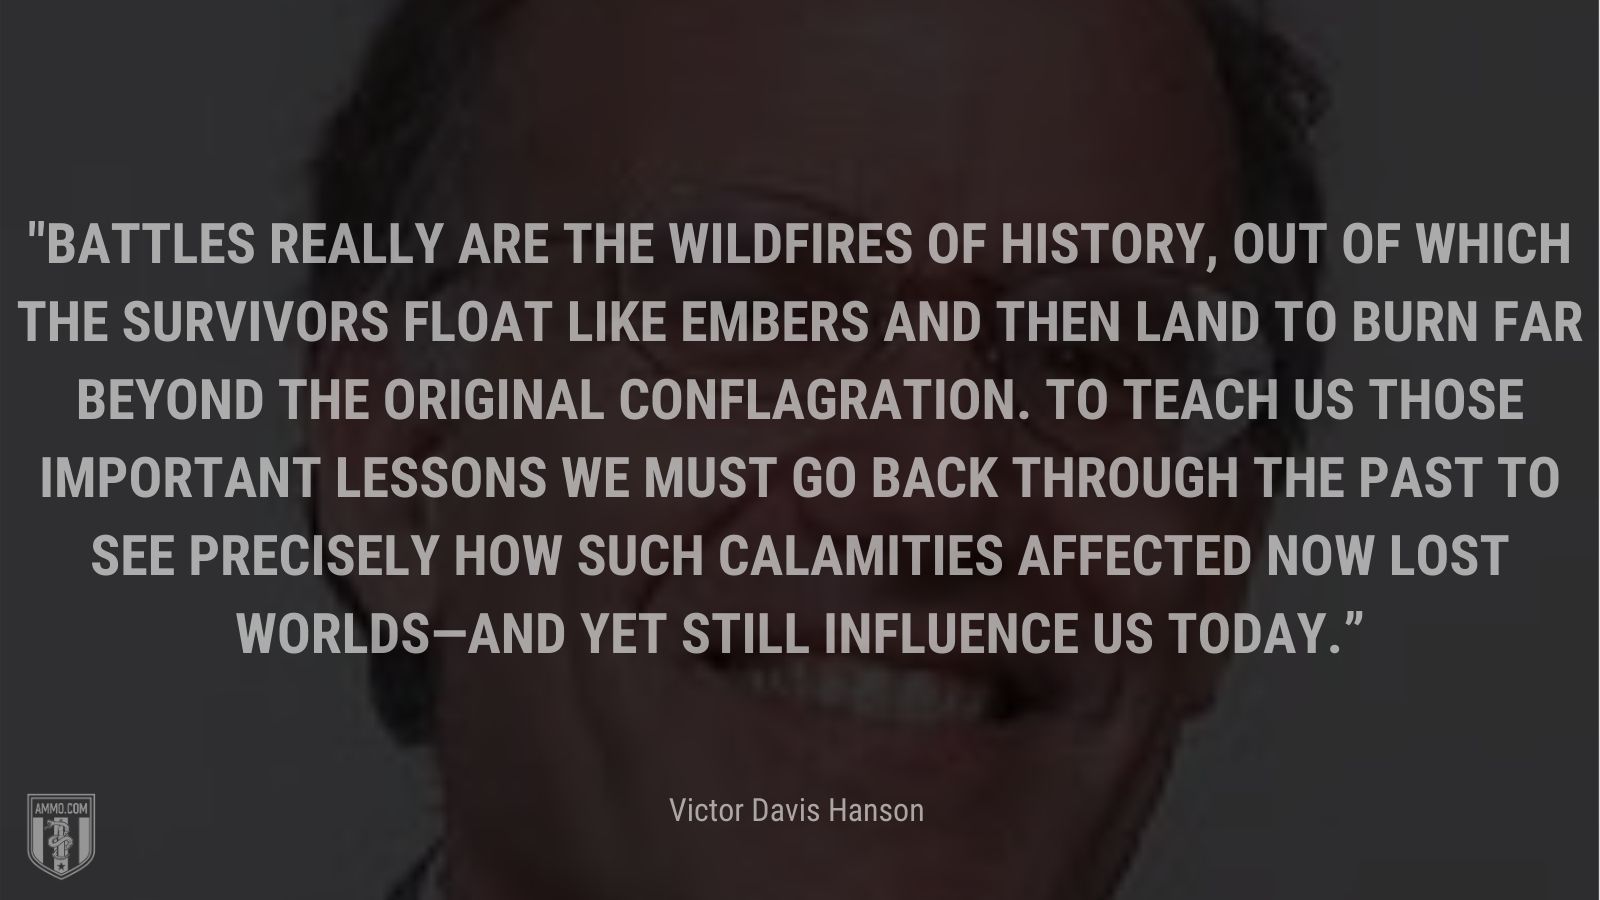 “Battles really are the wildfires of history, out of which the survivors float like embers and then land to burn far beyond the original conflagration. To teach us those important lessons we must go back through the past to see precisely how such calamities affected now lost worlds—and yet still influence us today.” - Victor Davis Hanson